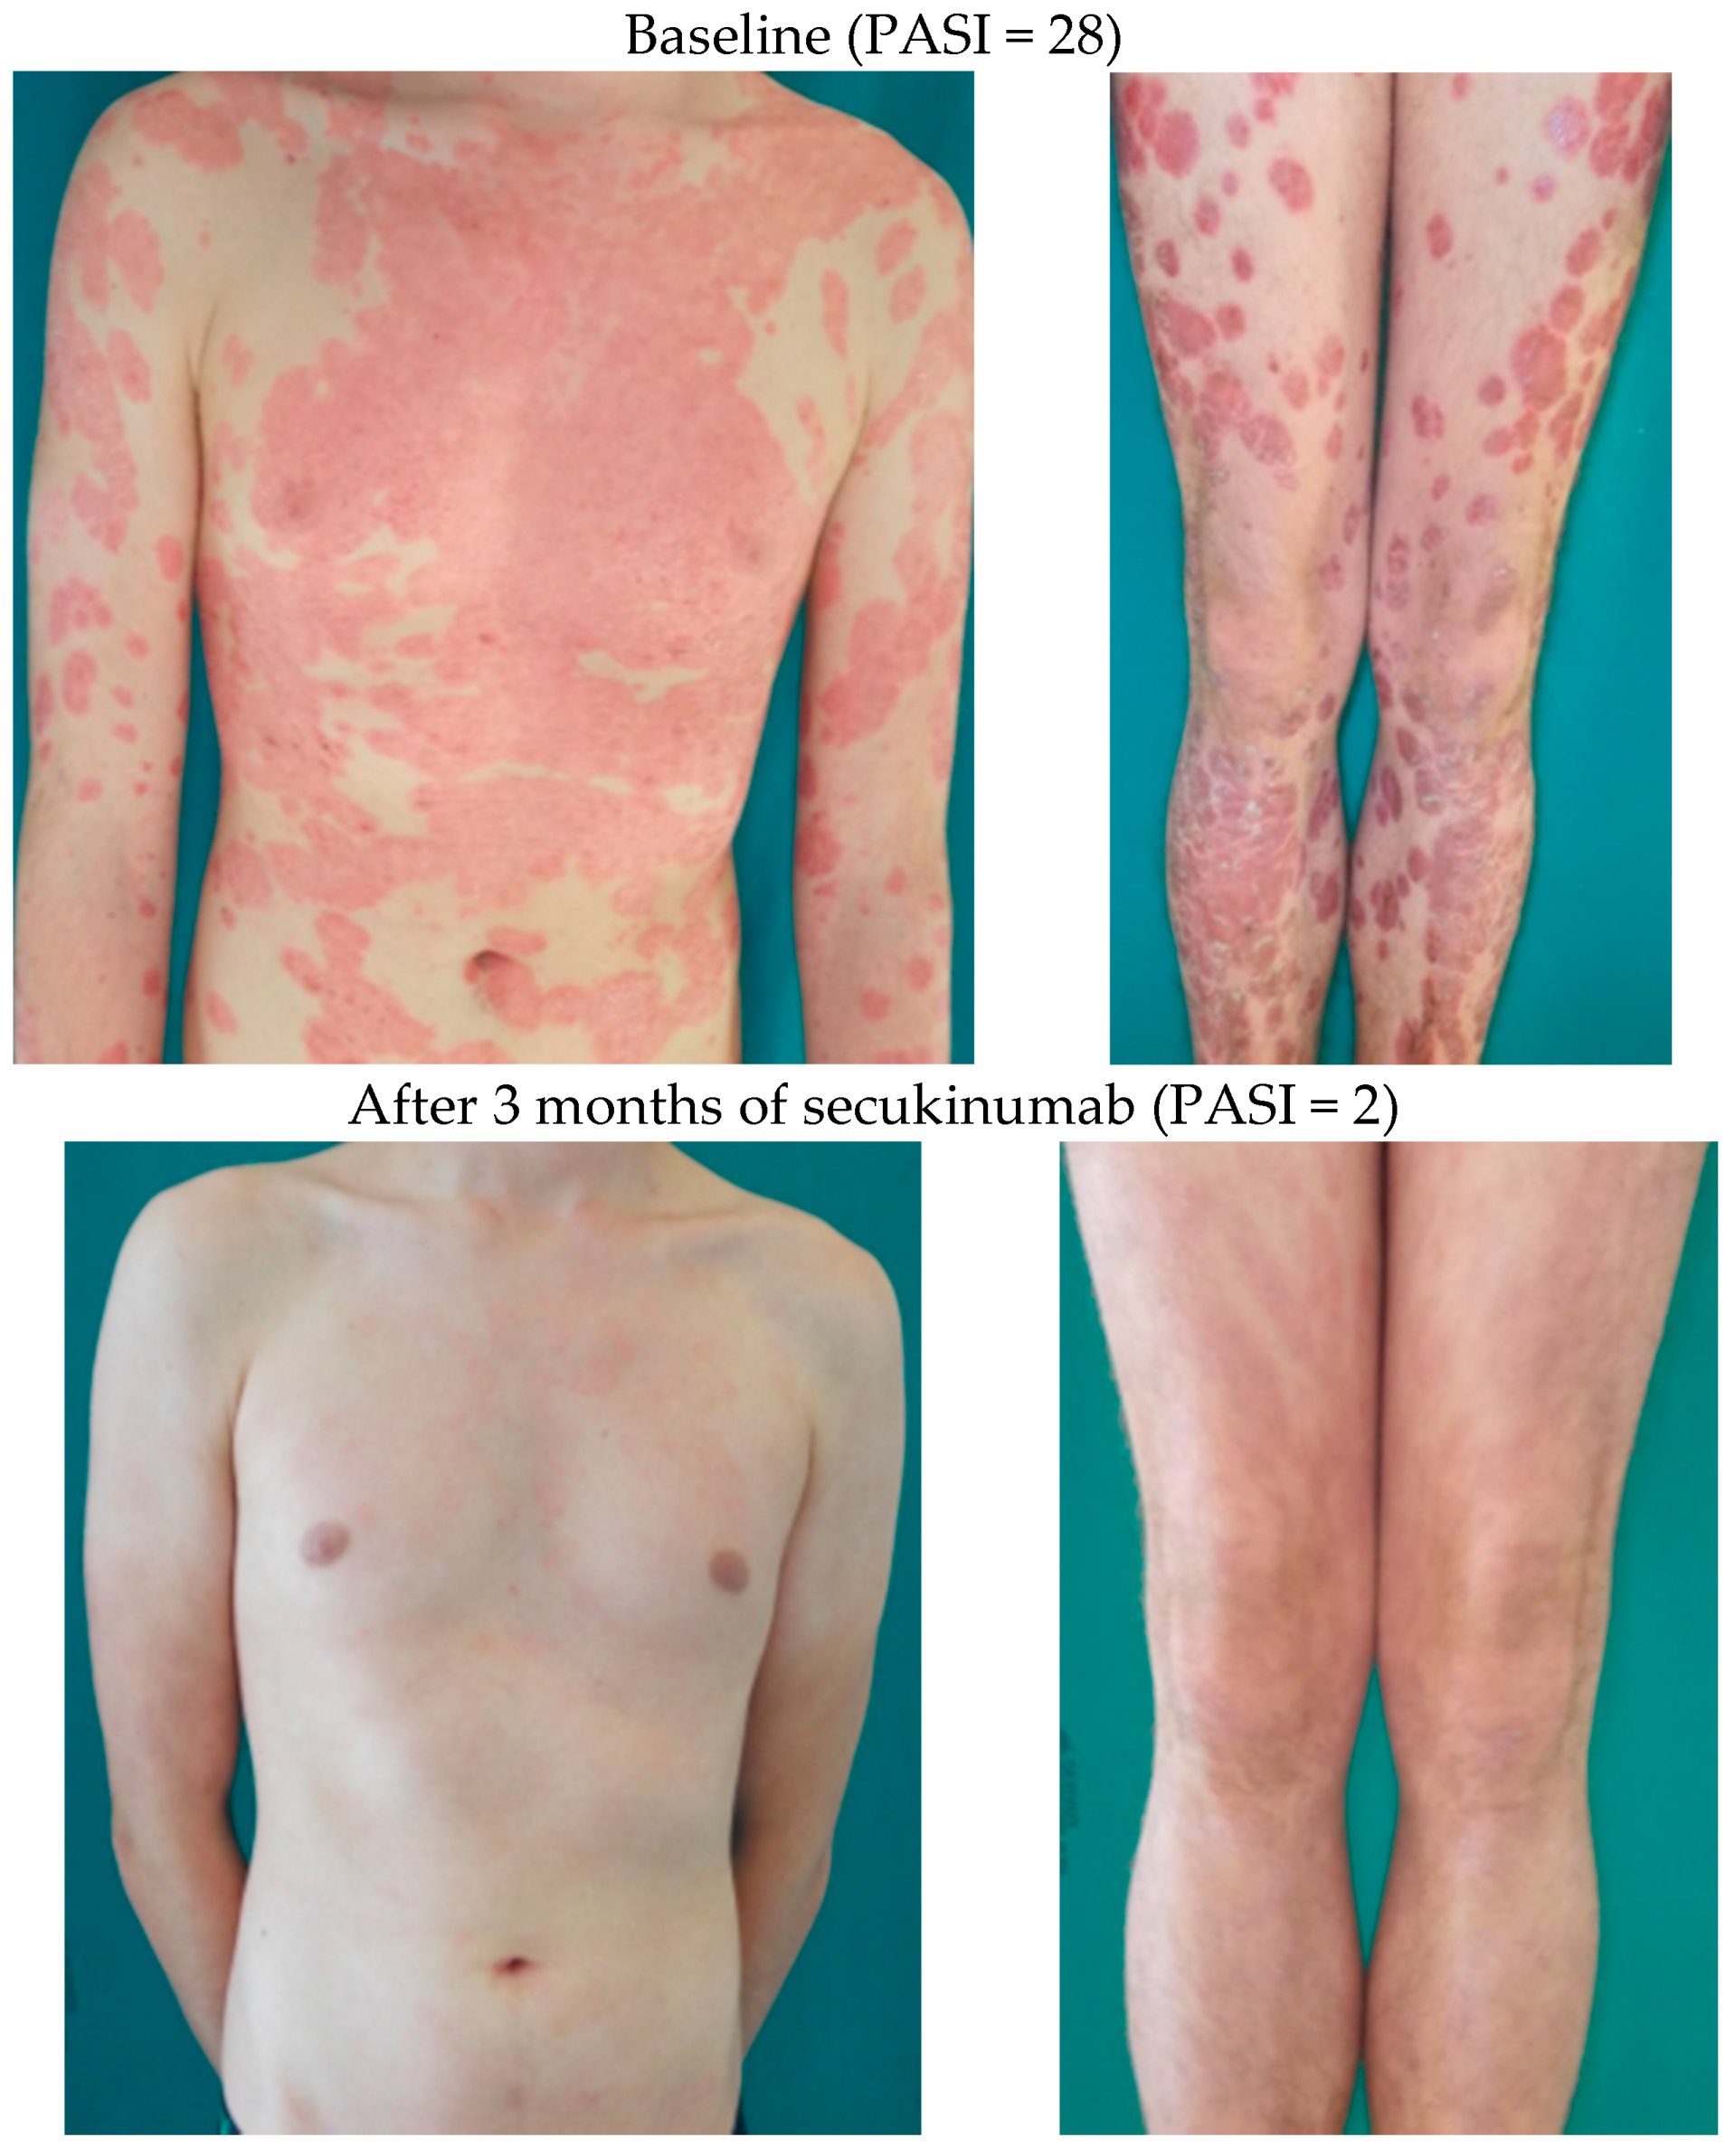 Efficacy 、Safety and PK of SHR-1314 in Patients With Moderate-to-Severe Plaque Psoriasis